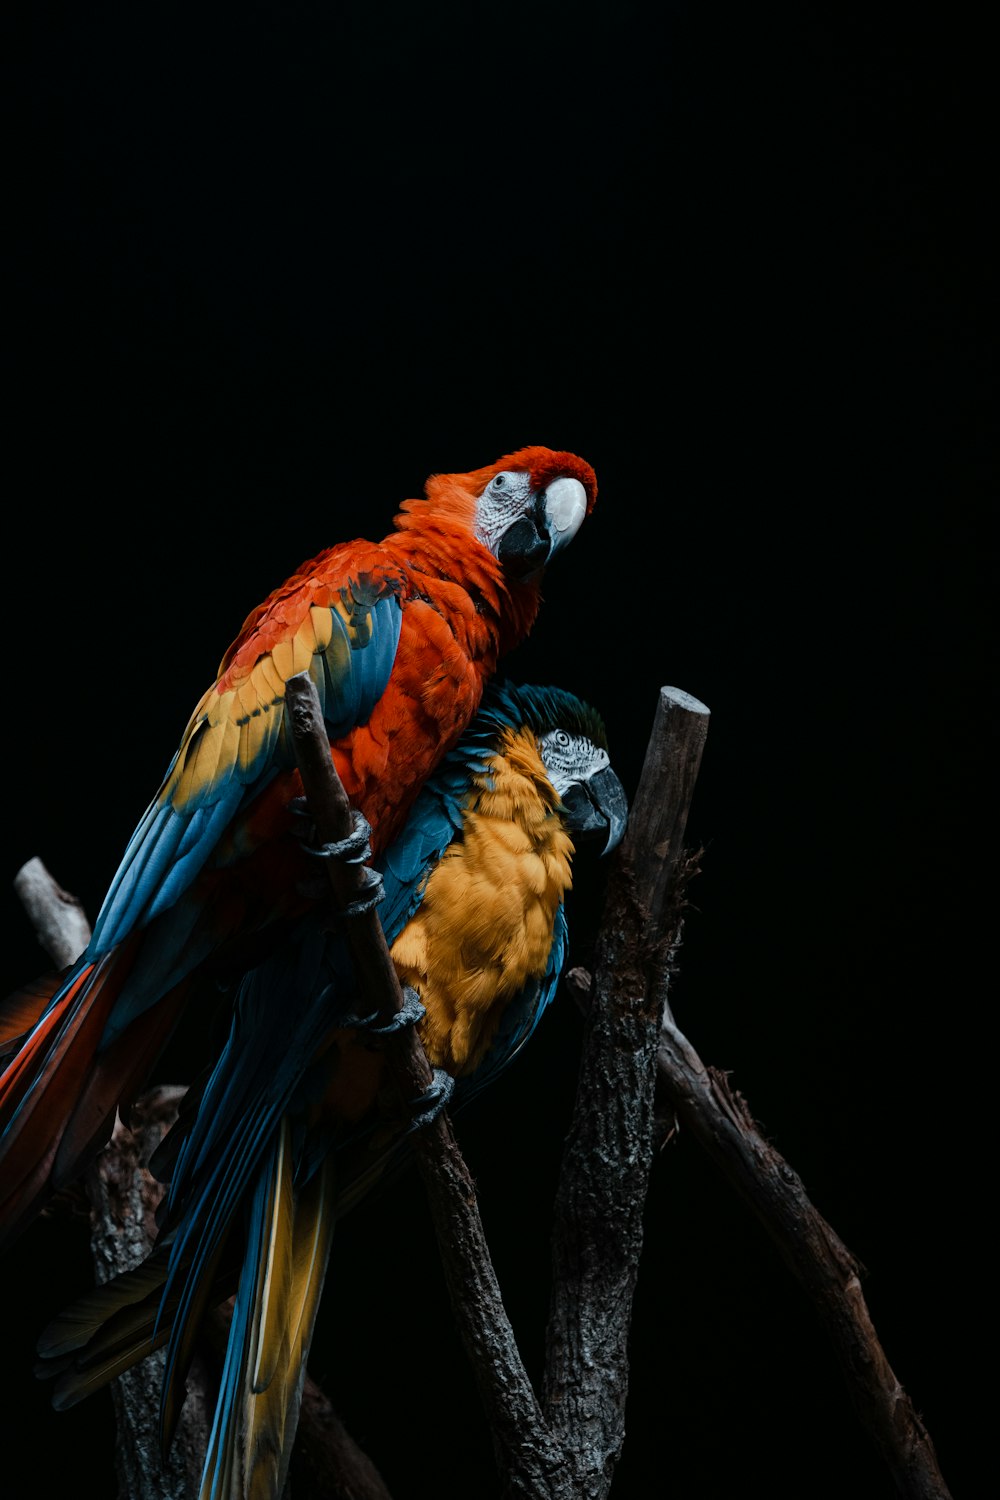 red blue and yellow macaw